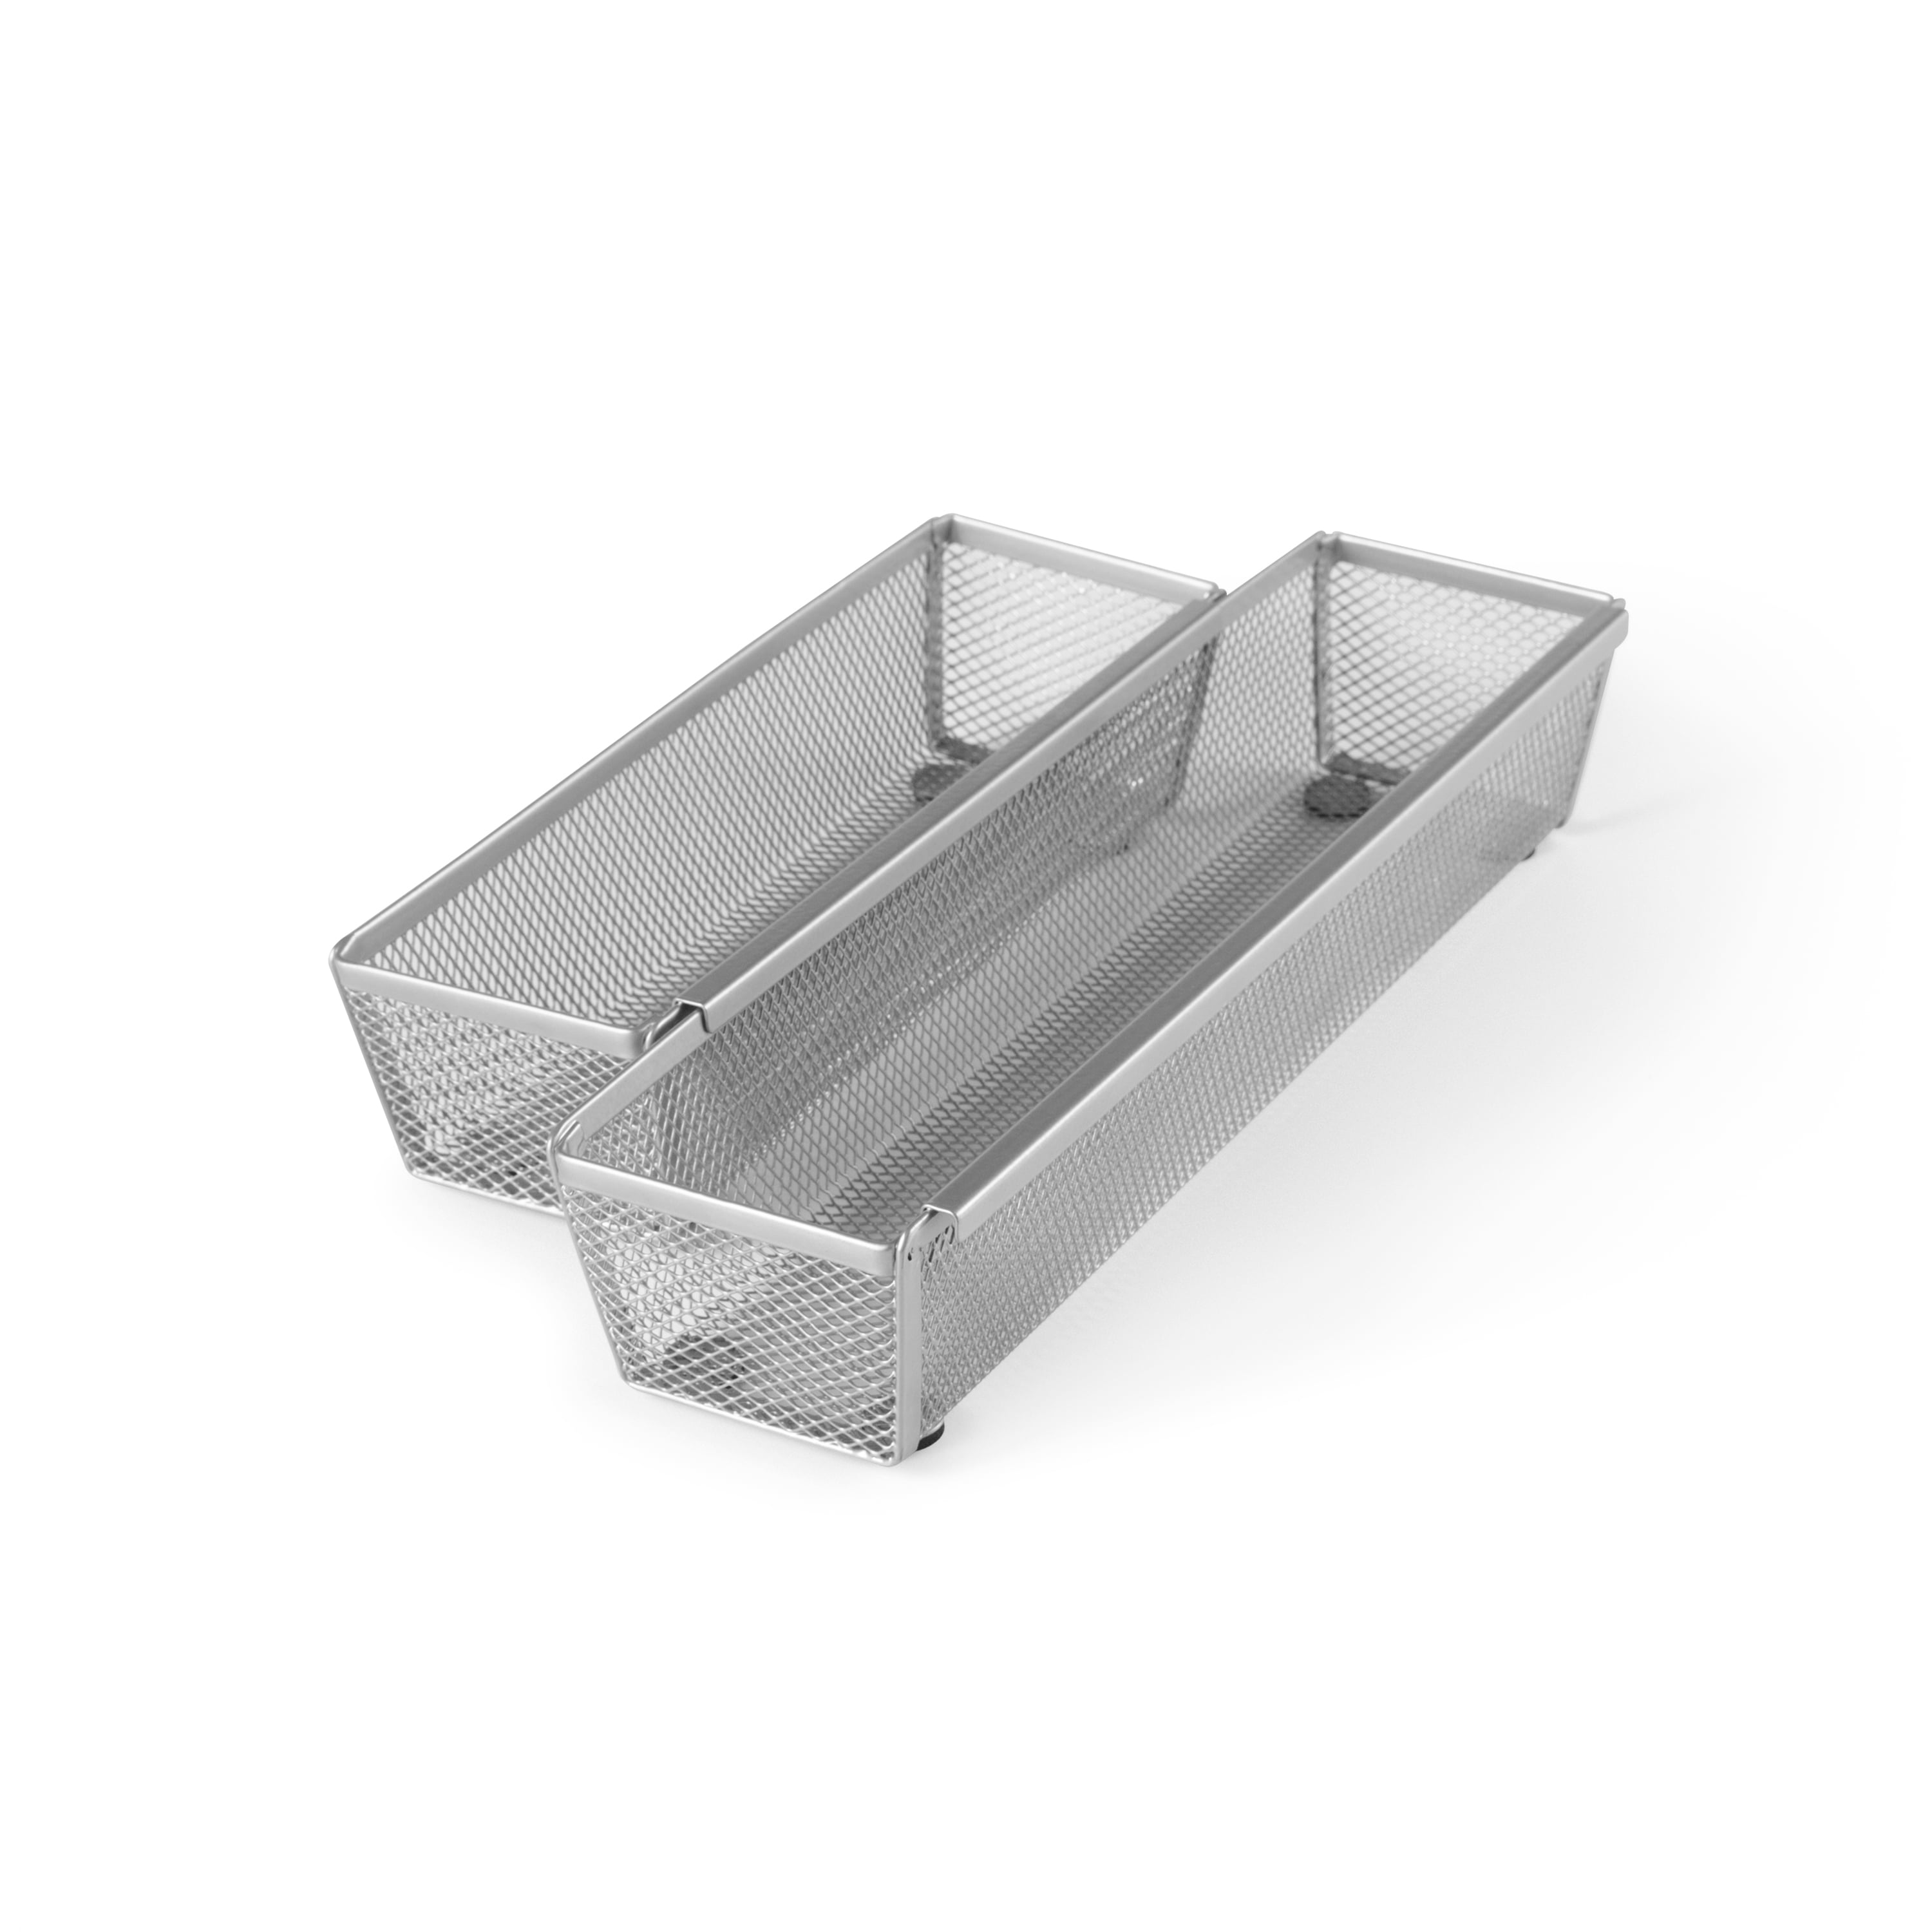 Mainstays Narrow Steel Mesh Drawer Organizers, Set of 2, 3" x 9" and 3